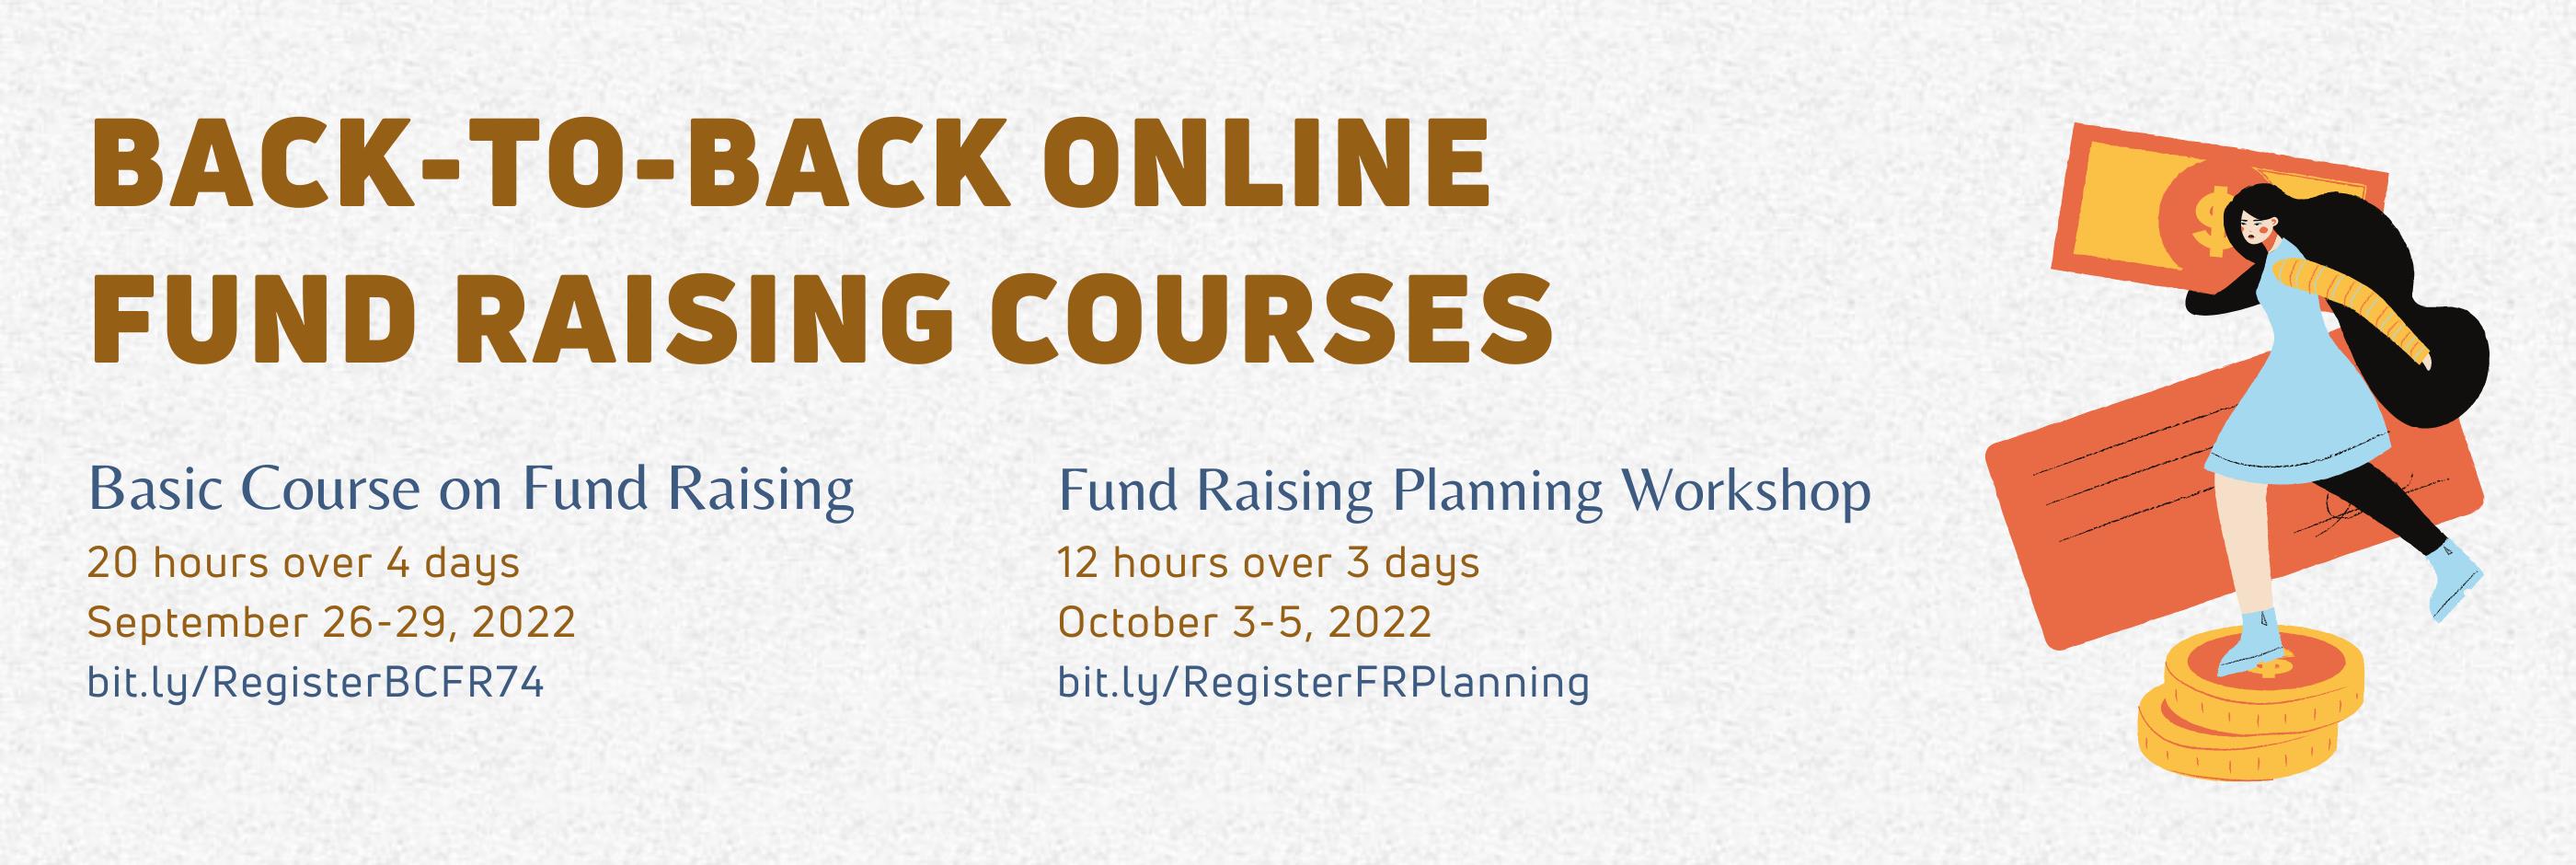 Join our Back-to-Back Fund Raising Courses this -Ber Months!